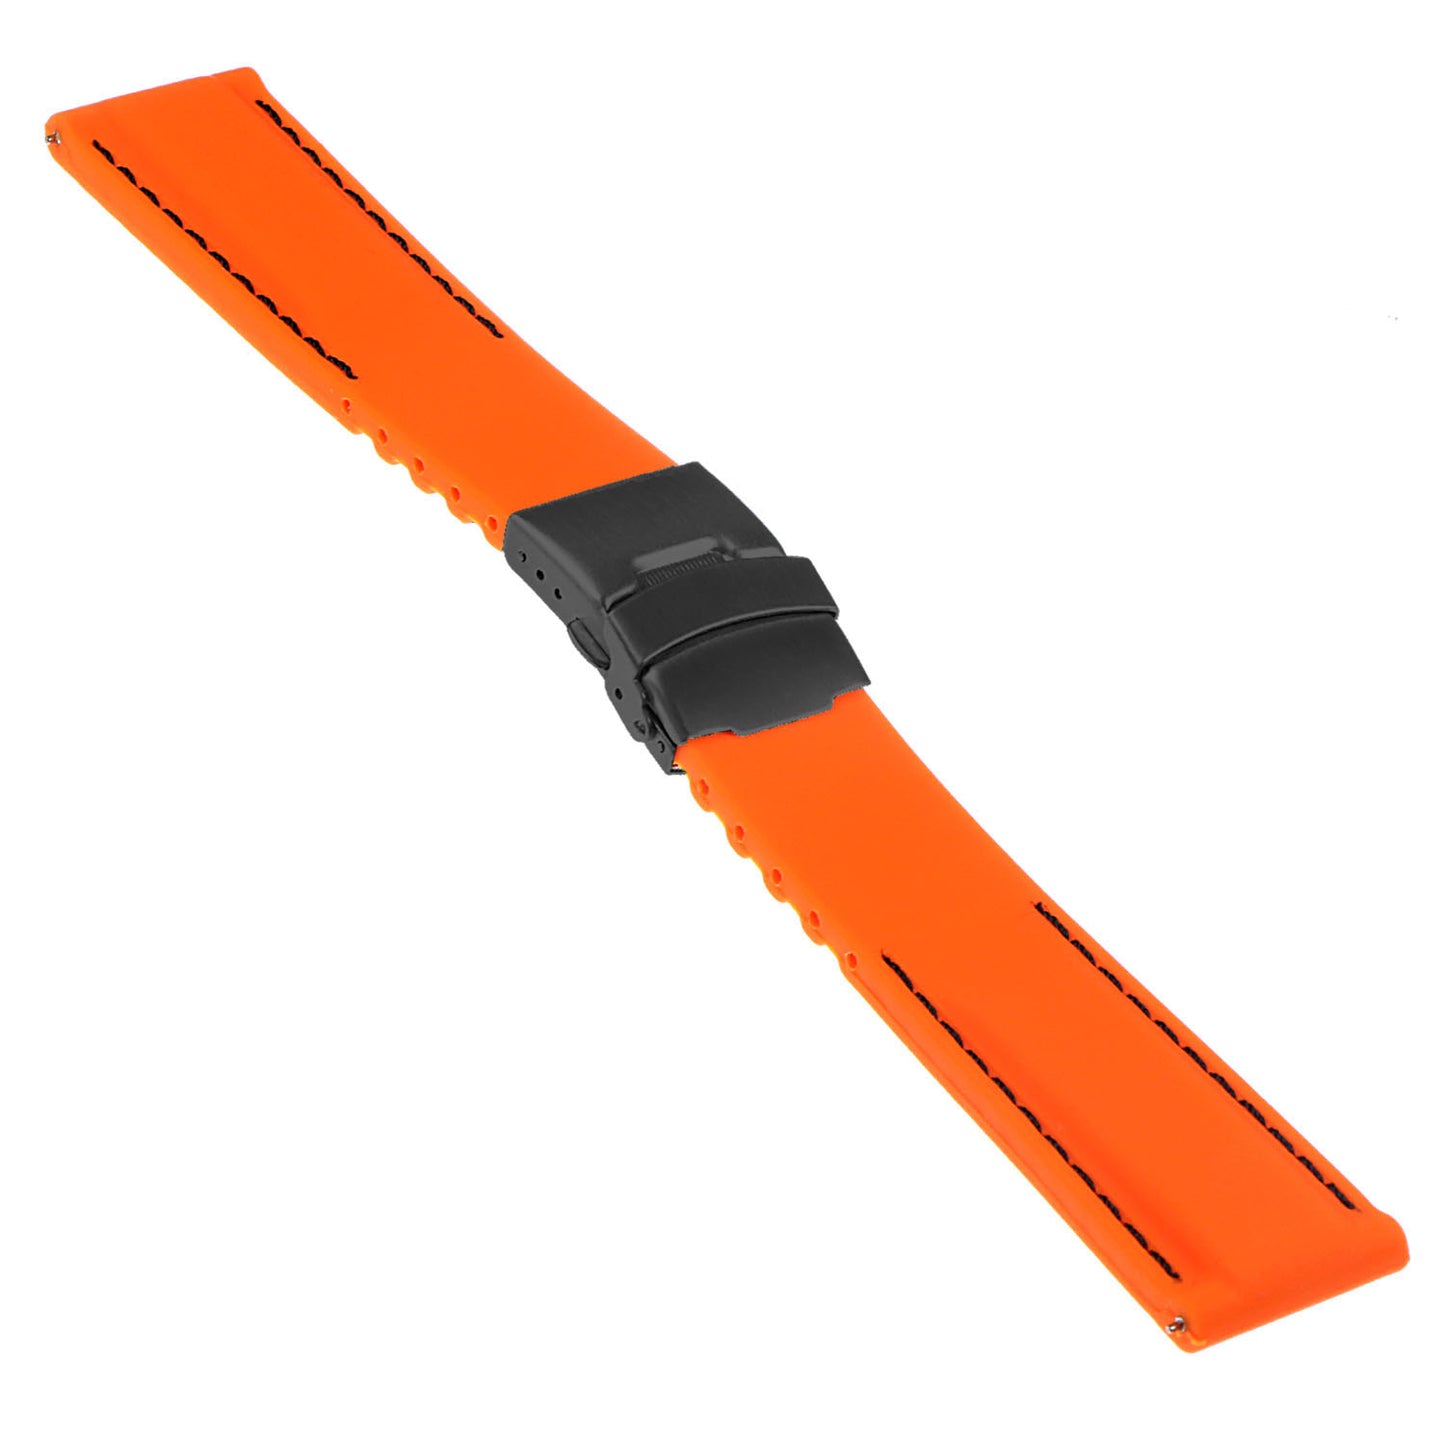 Rubber Strap with Contrast Stitching for Samsung Gear Sport